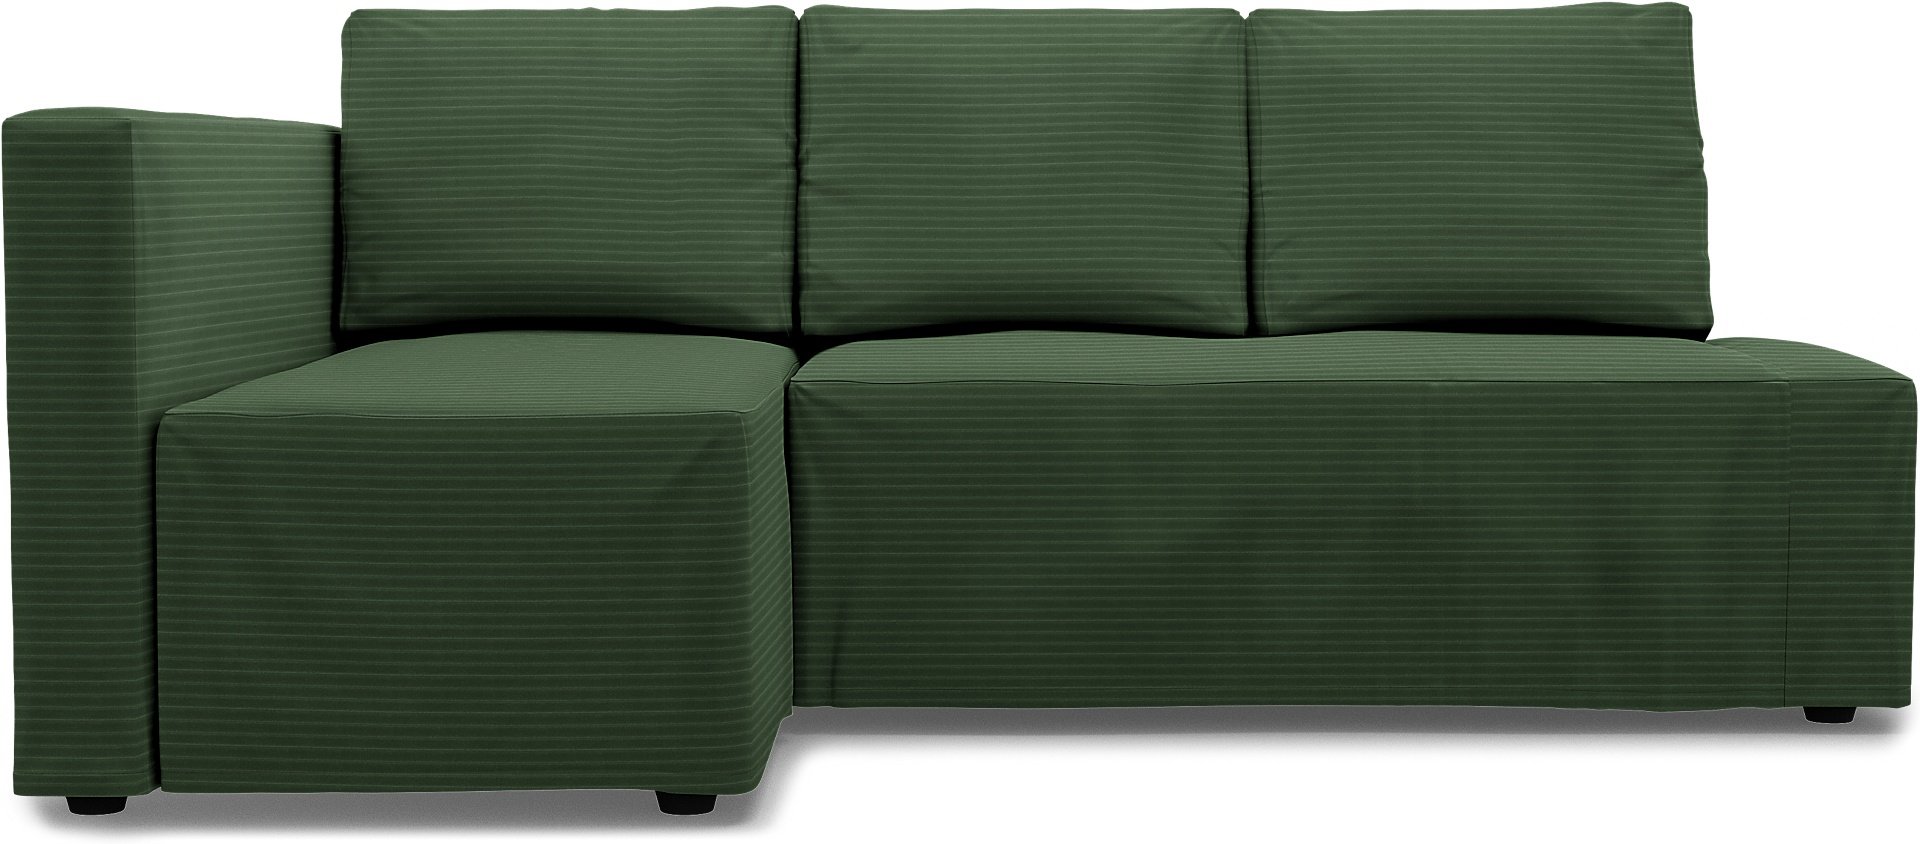 IKEA - Friheten Sofa Bed with Left Chaise Cover, Palm Green, Corduroy - Bemz